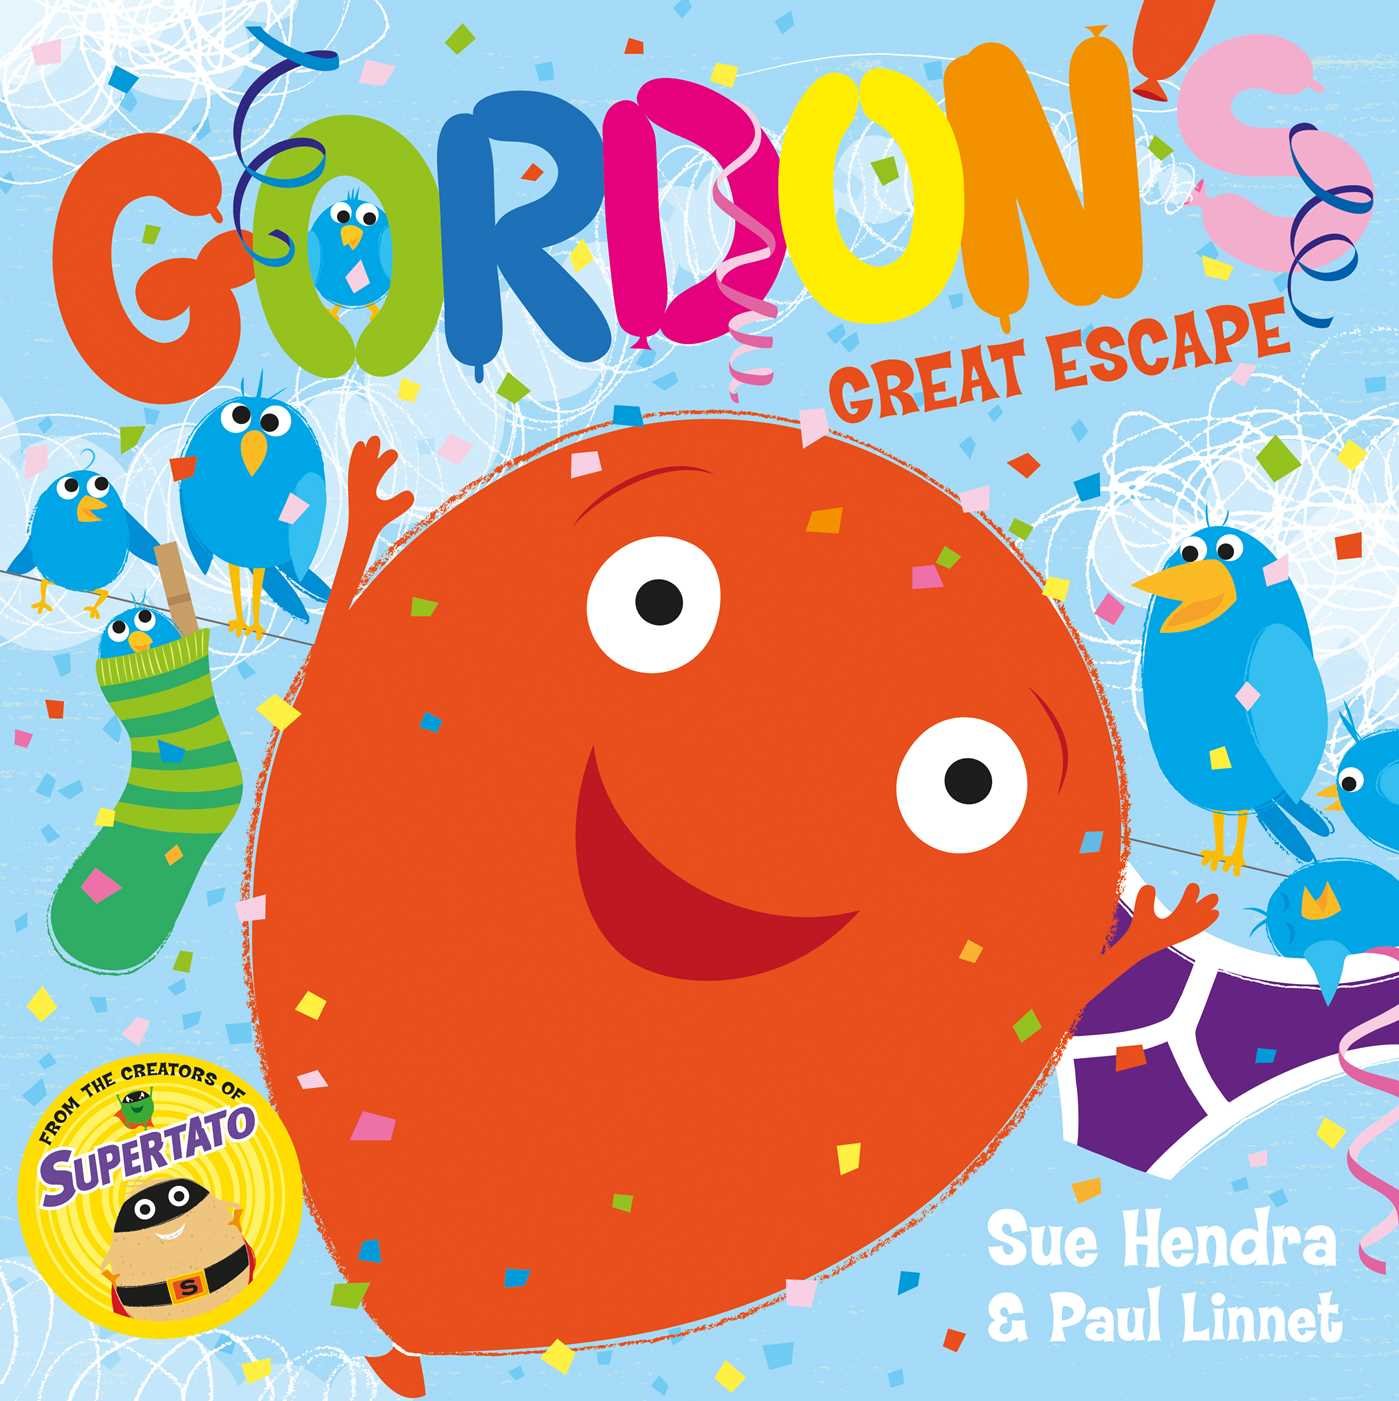 Gordon’s Great Escape by Sue Hendra and Paul Linnet